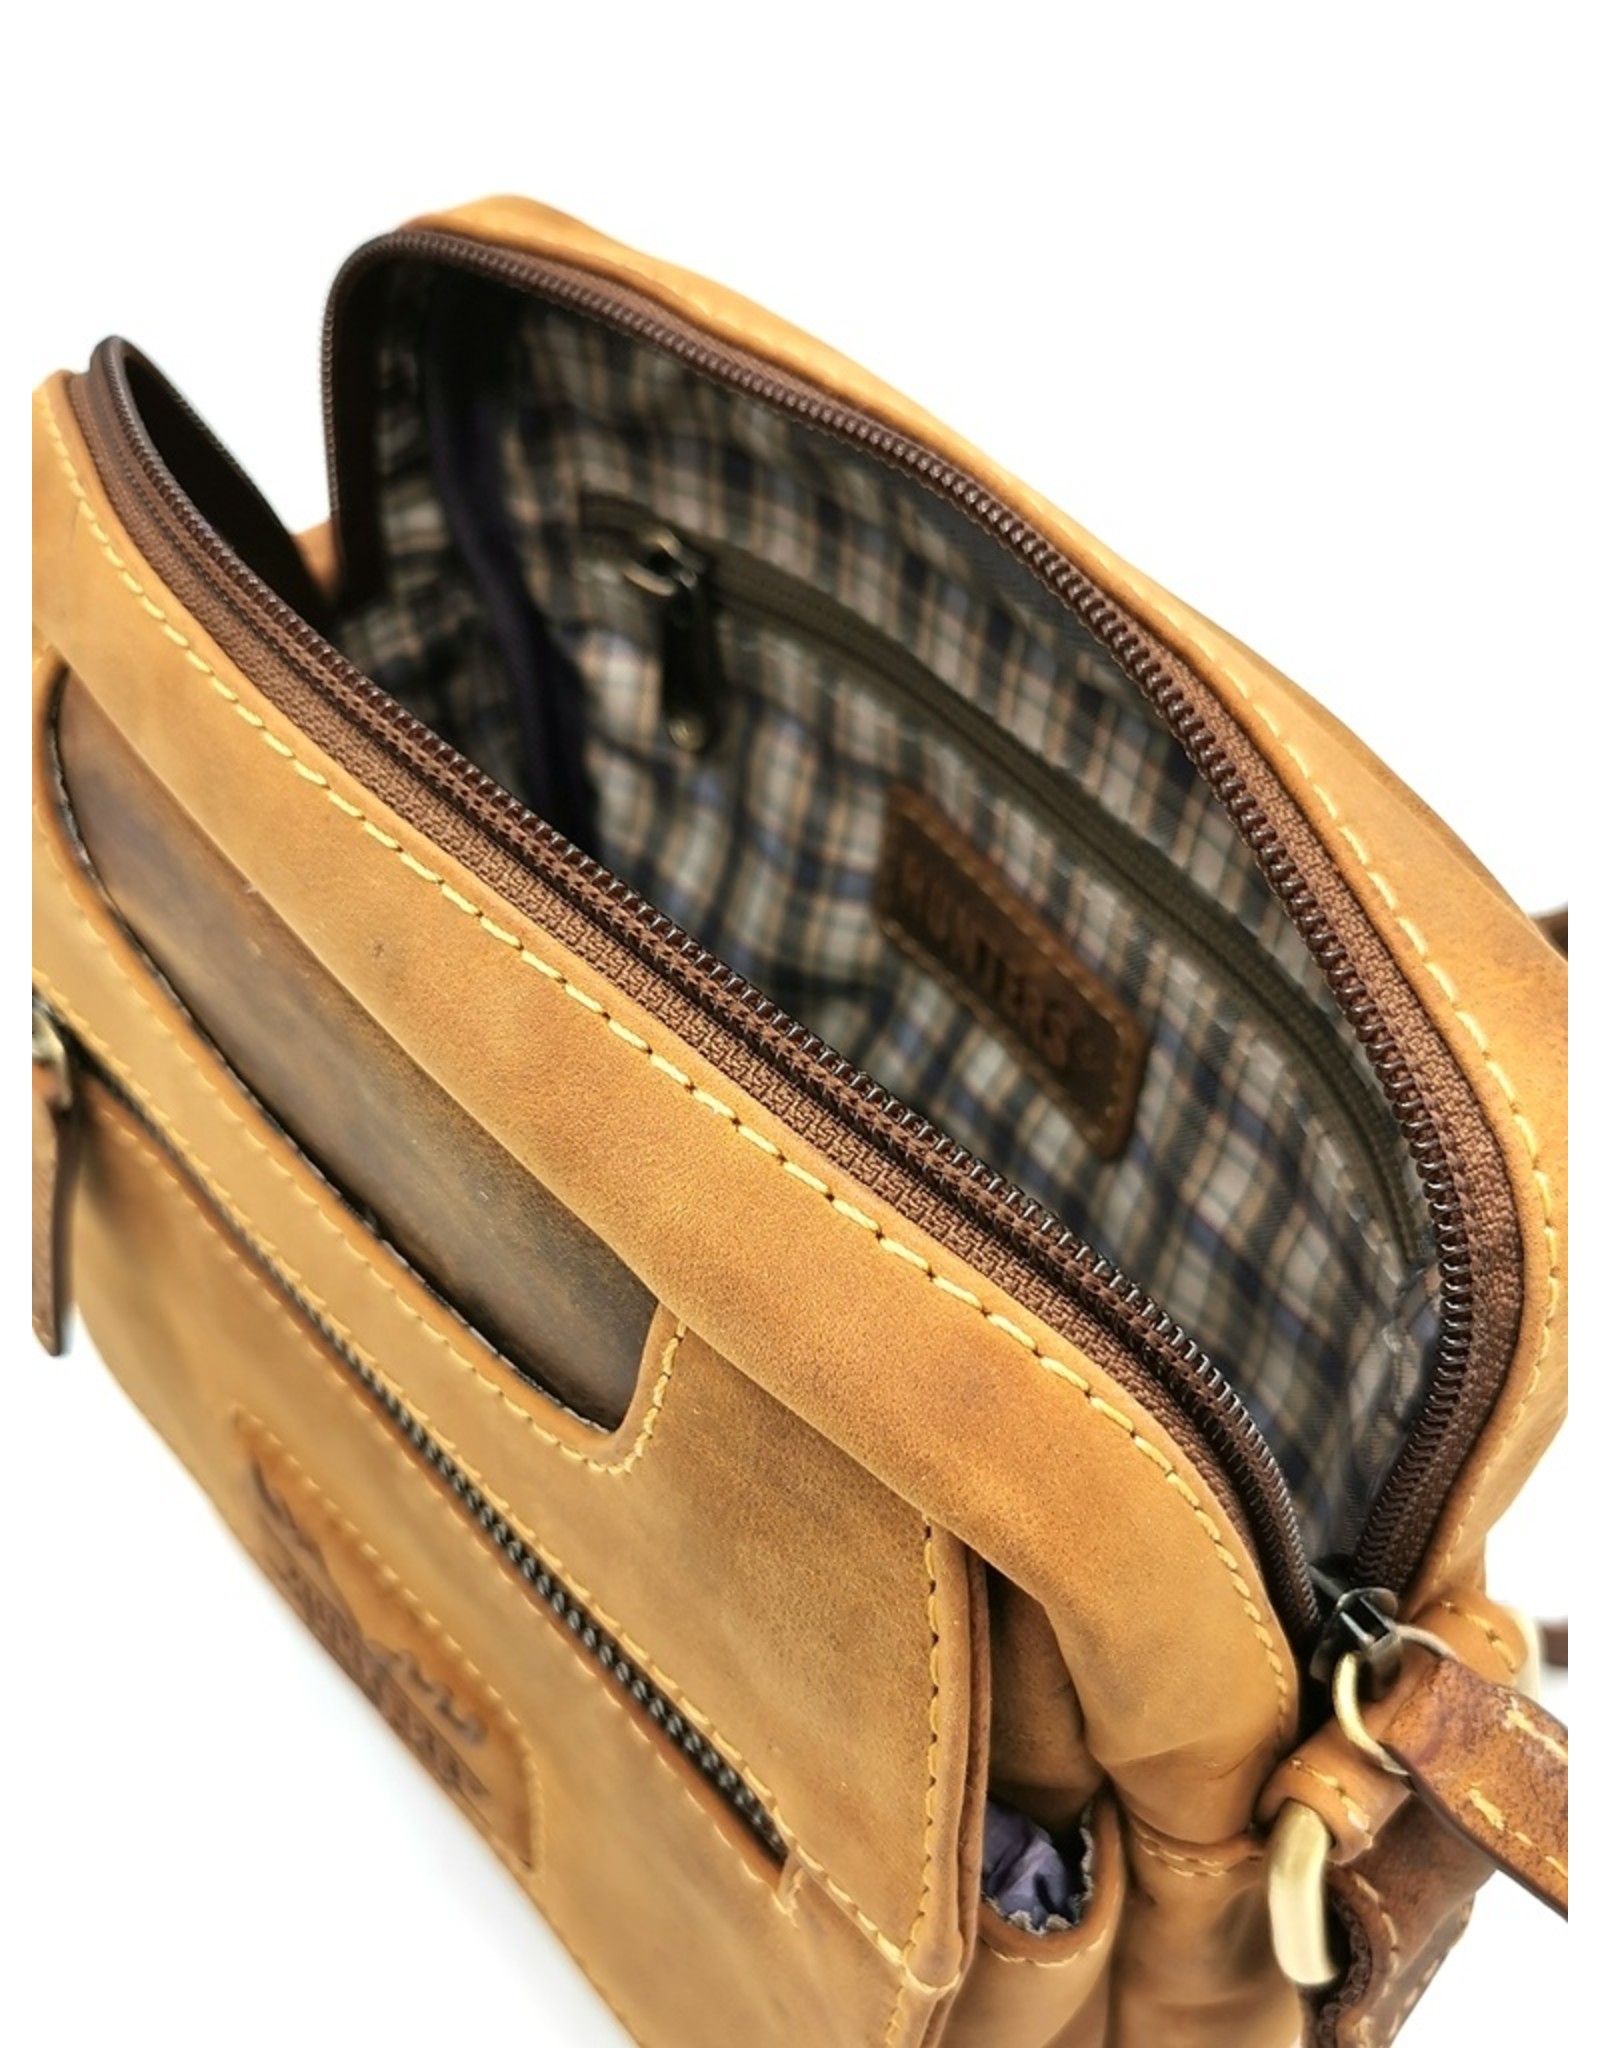 Hunters Leather shoulder bags Leather crossbody bags - Hunter crossbody bag Buffalo leather